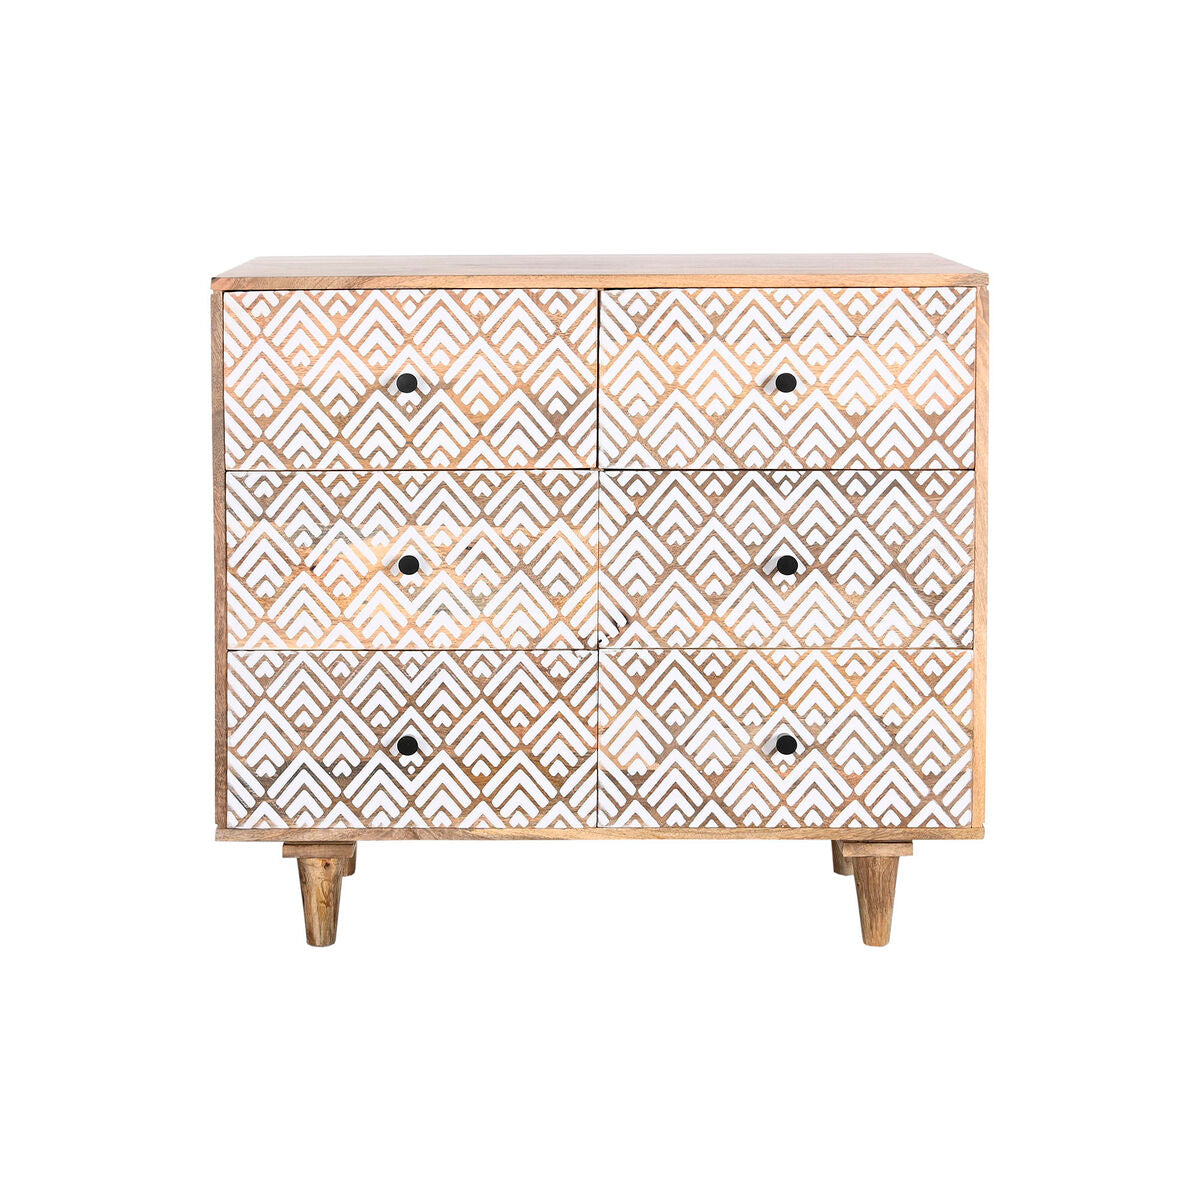 Chest of drawers in Mango wood with White and Black Details (90 x 40 x 85 cm)